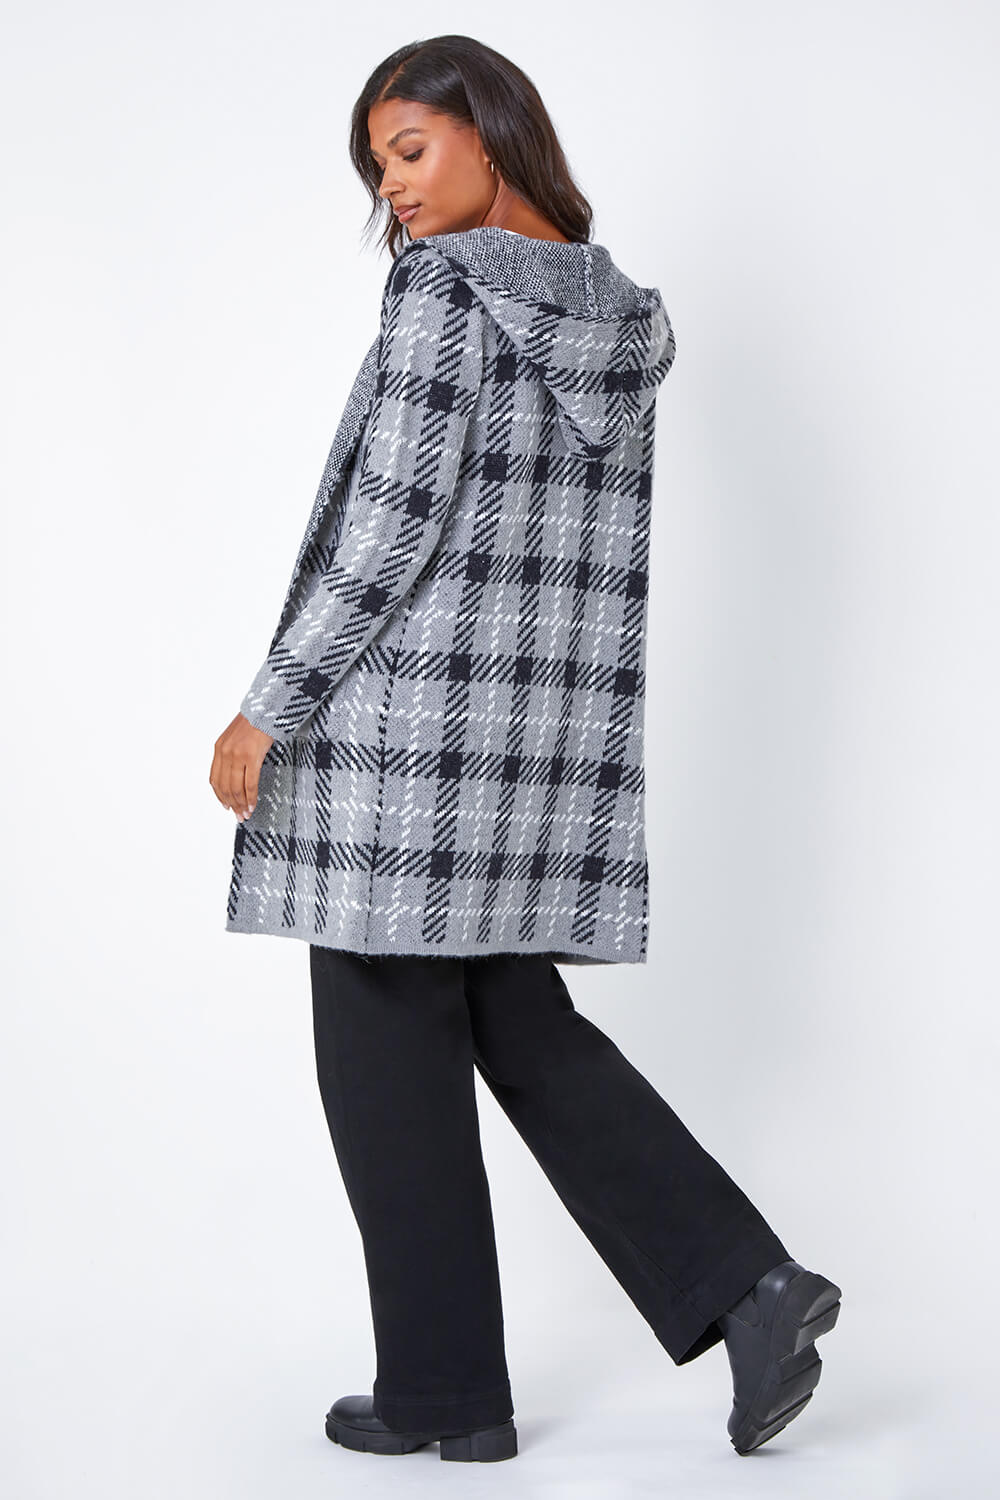 Grey Check Longline Hooded Cardigan, Image 3 of 7